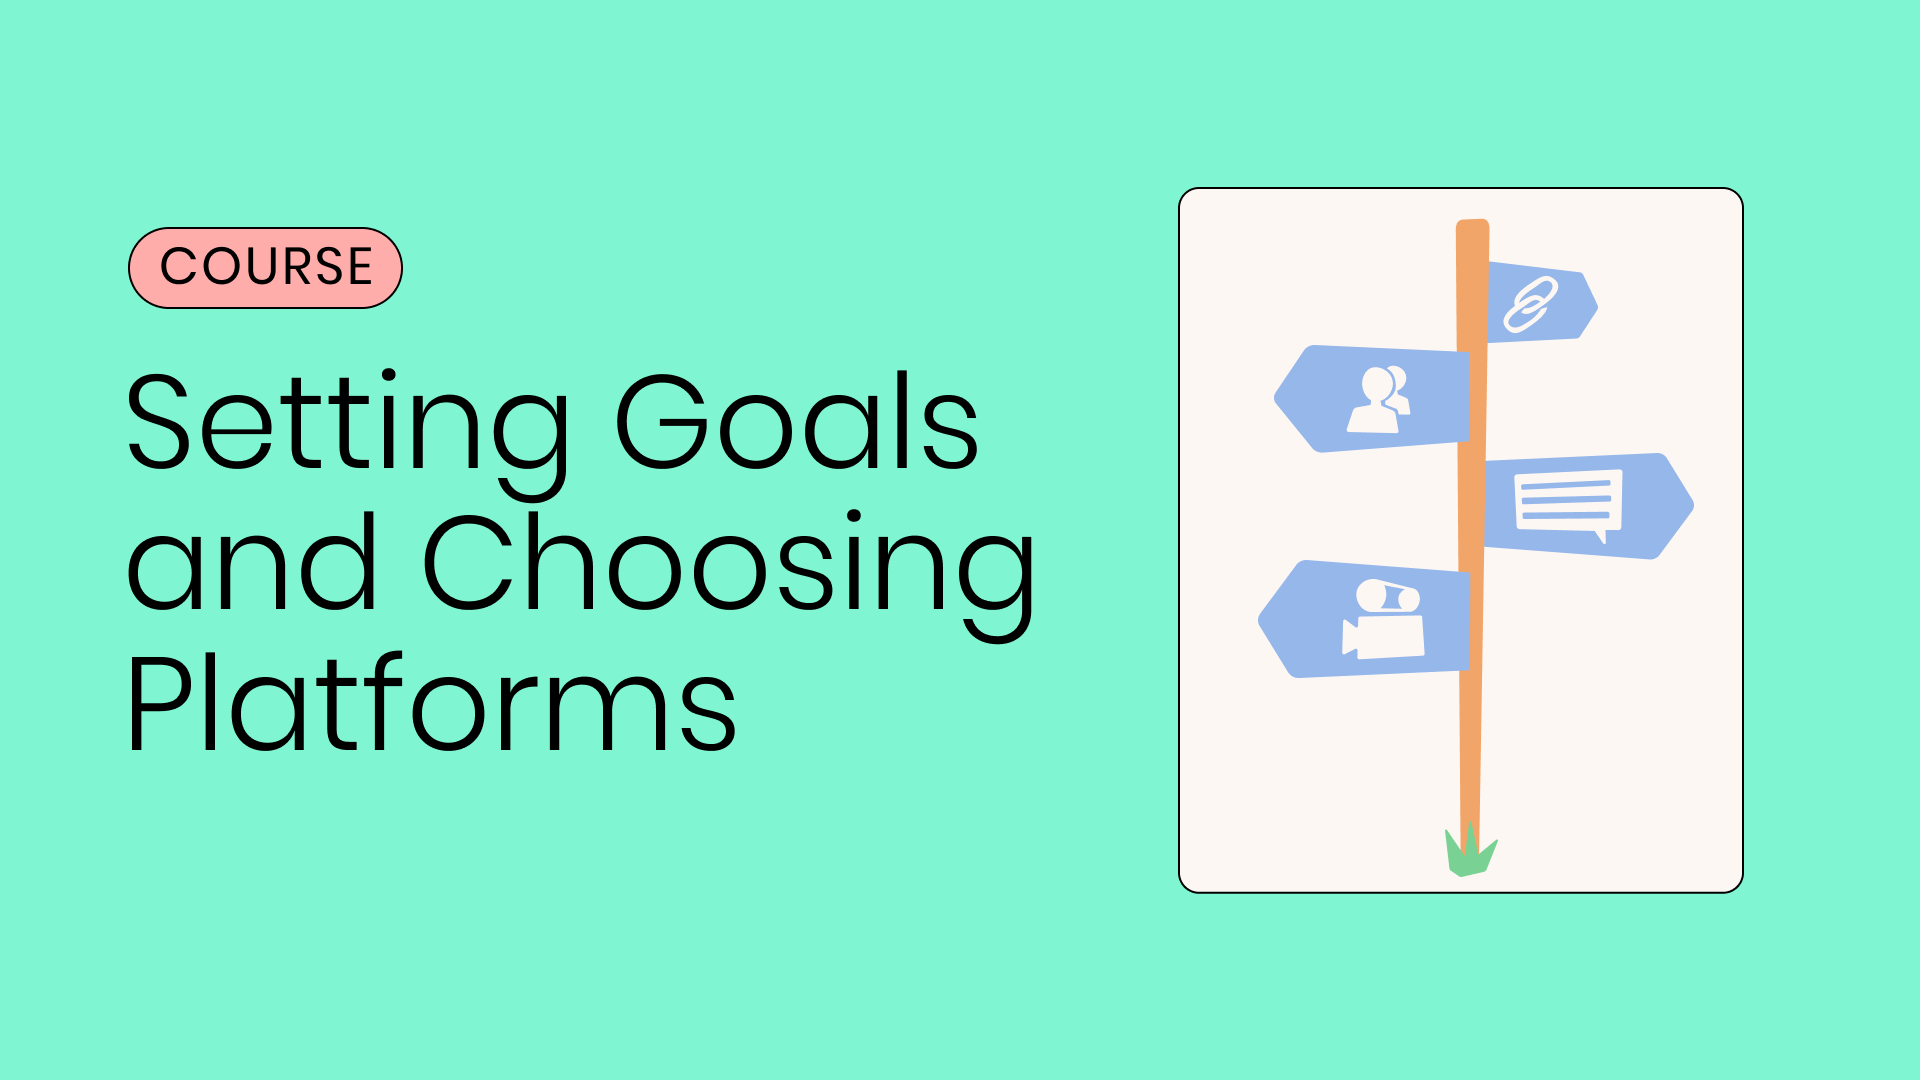 Graphic image of text referring to the course title "Setting Goals and Choosing Platforms" on social media.